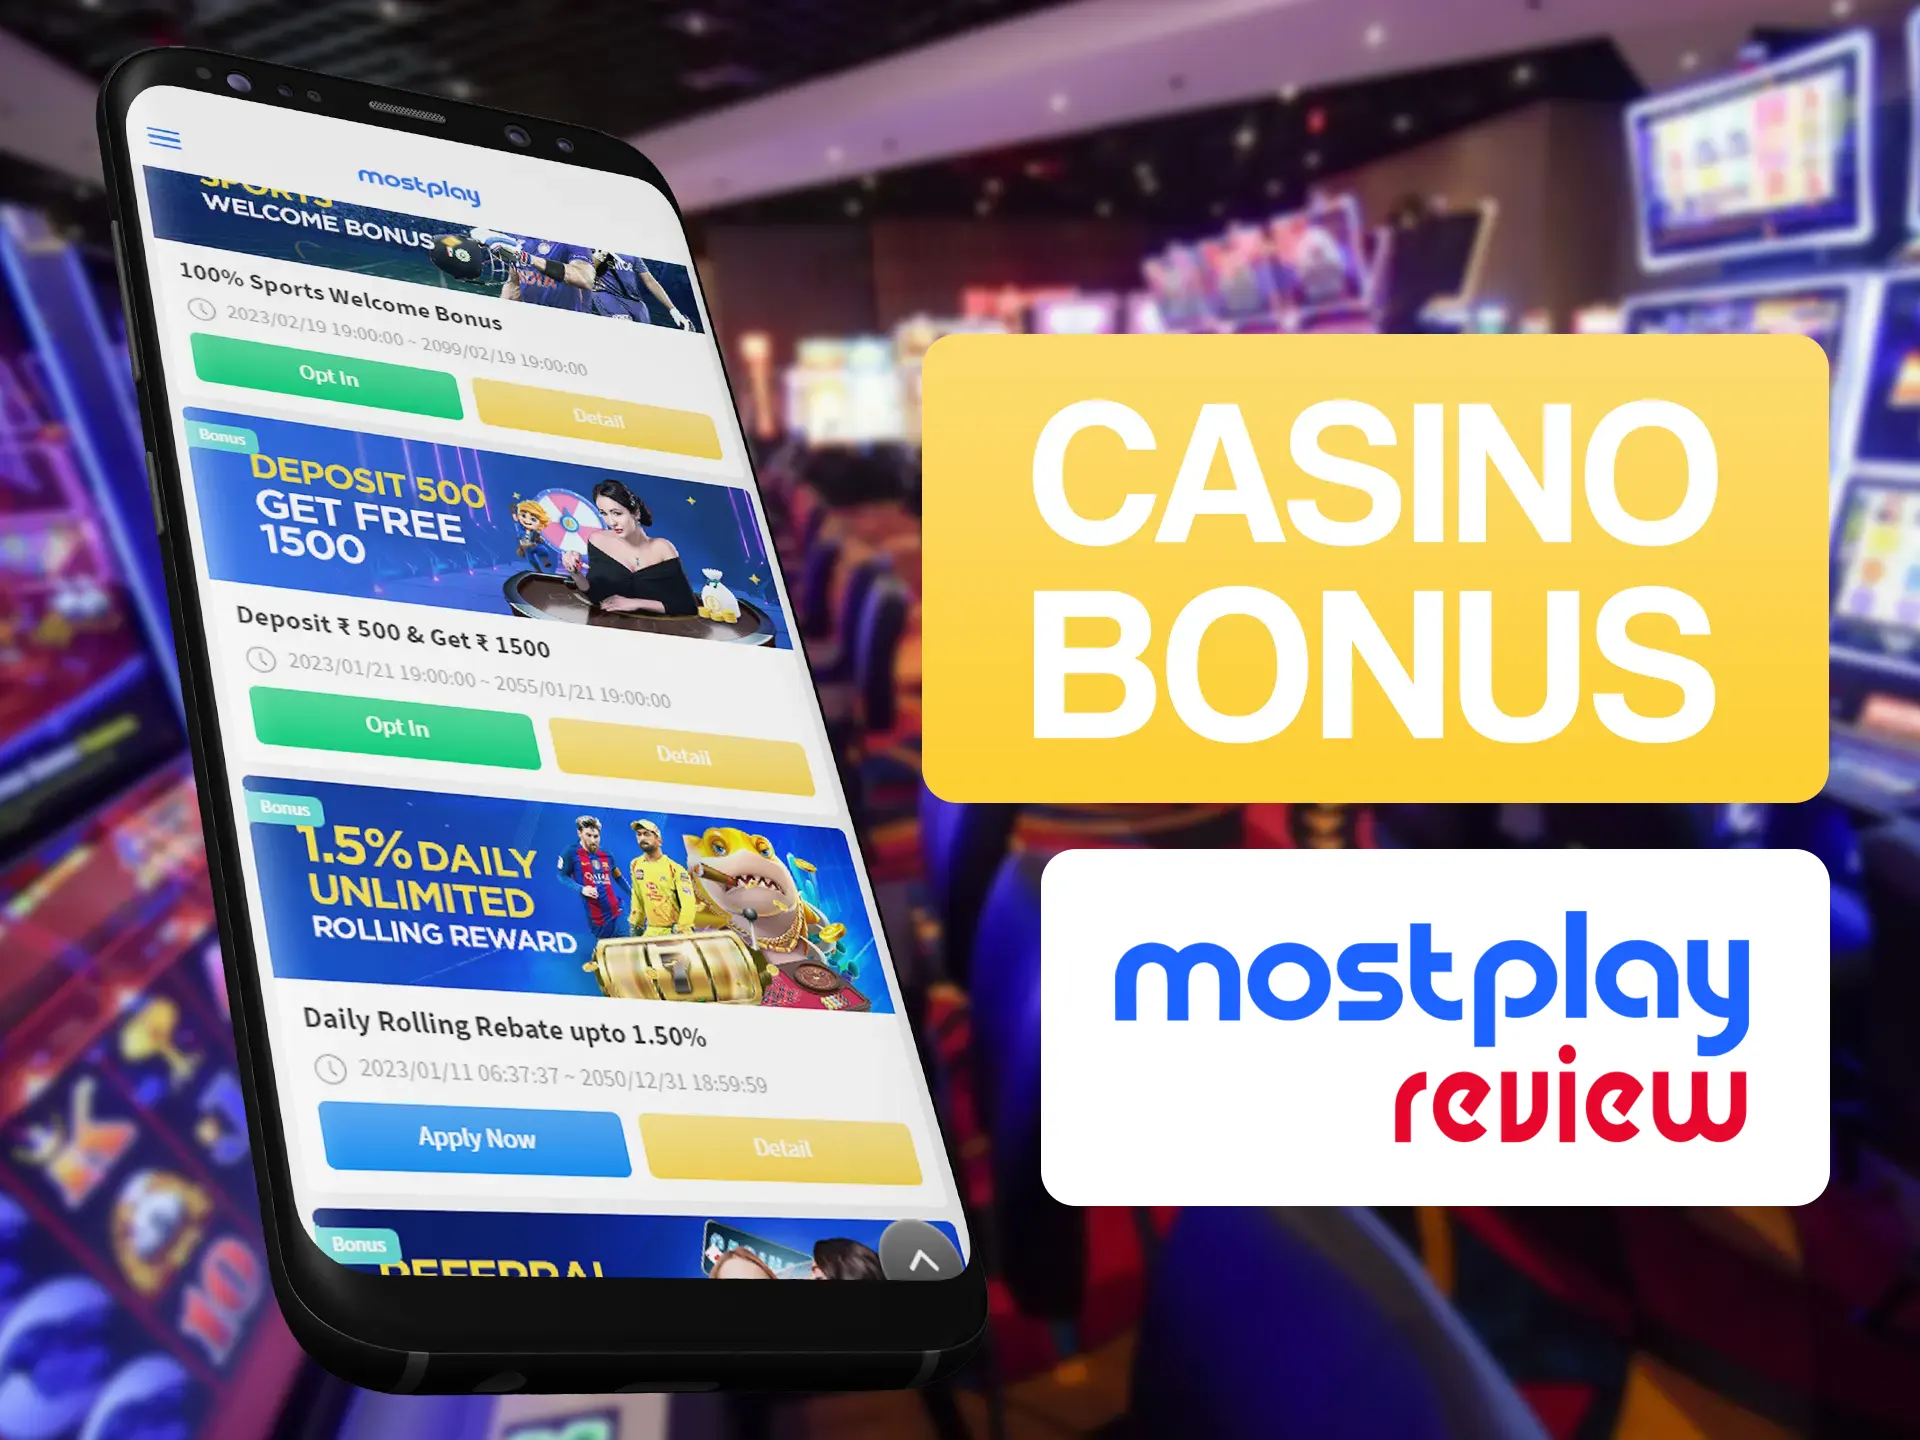 Spend money by playing casino games at Mostplay and get your bonus.